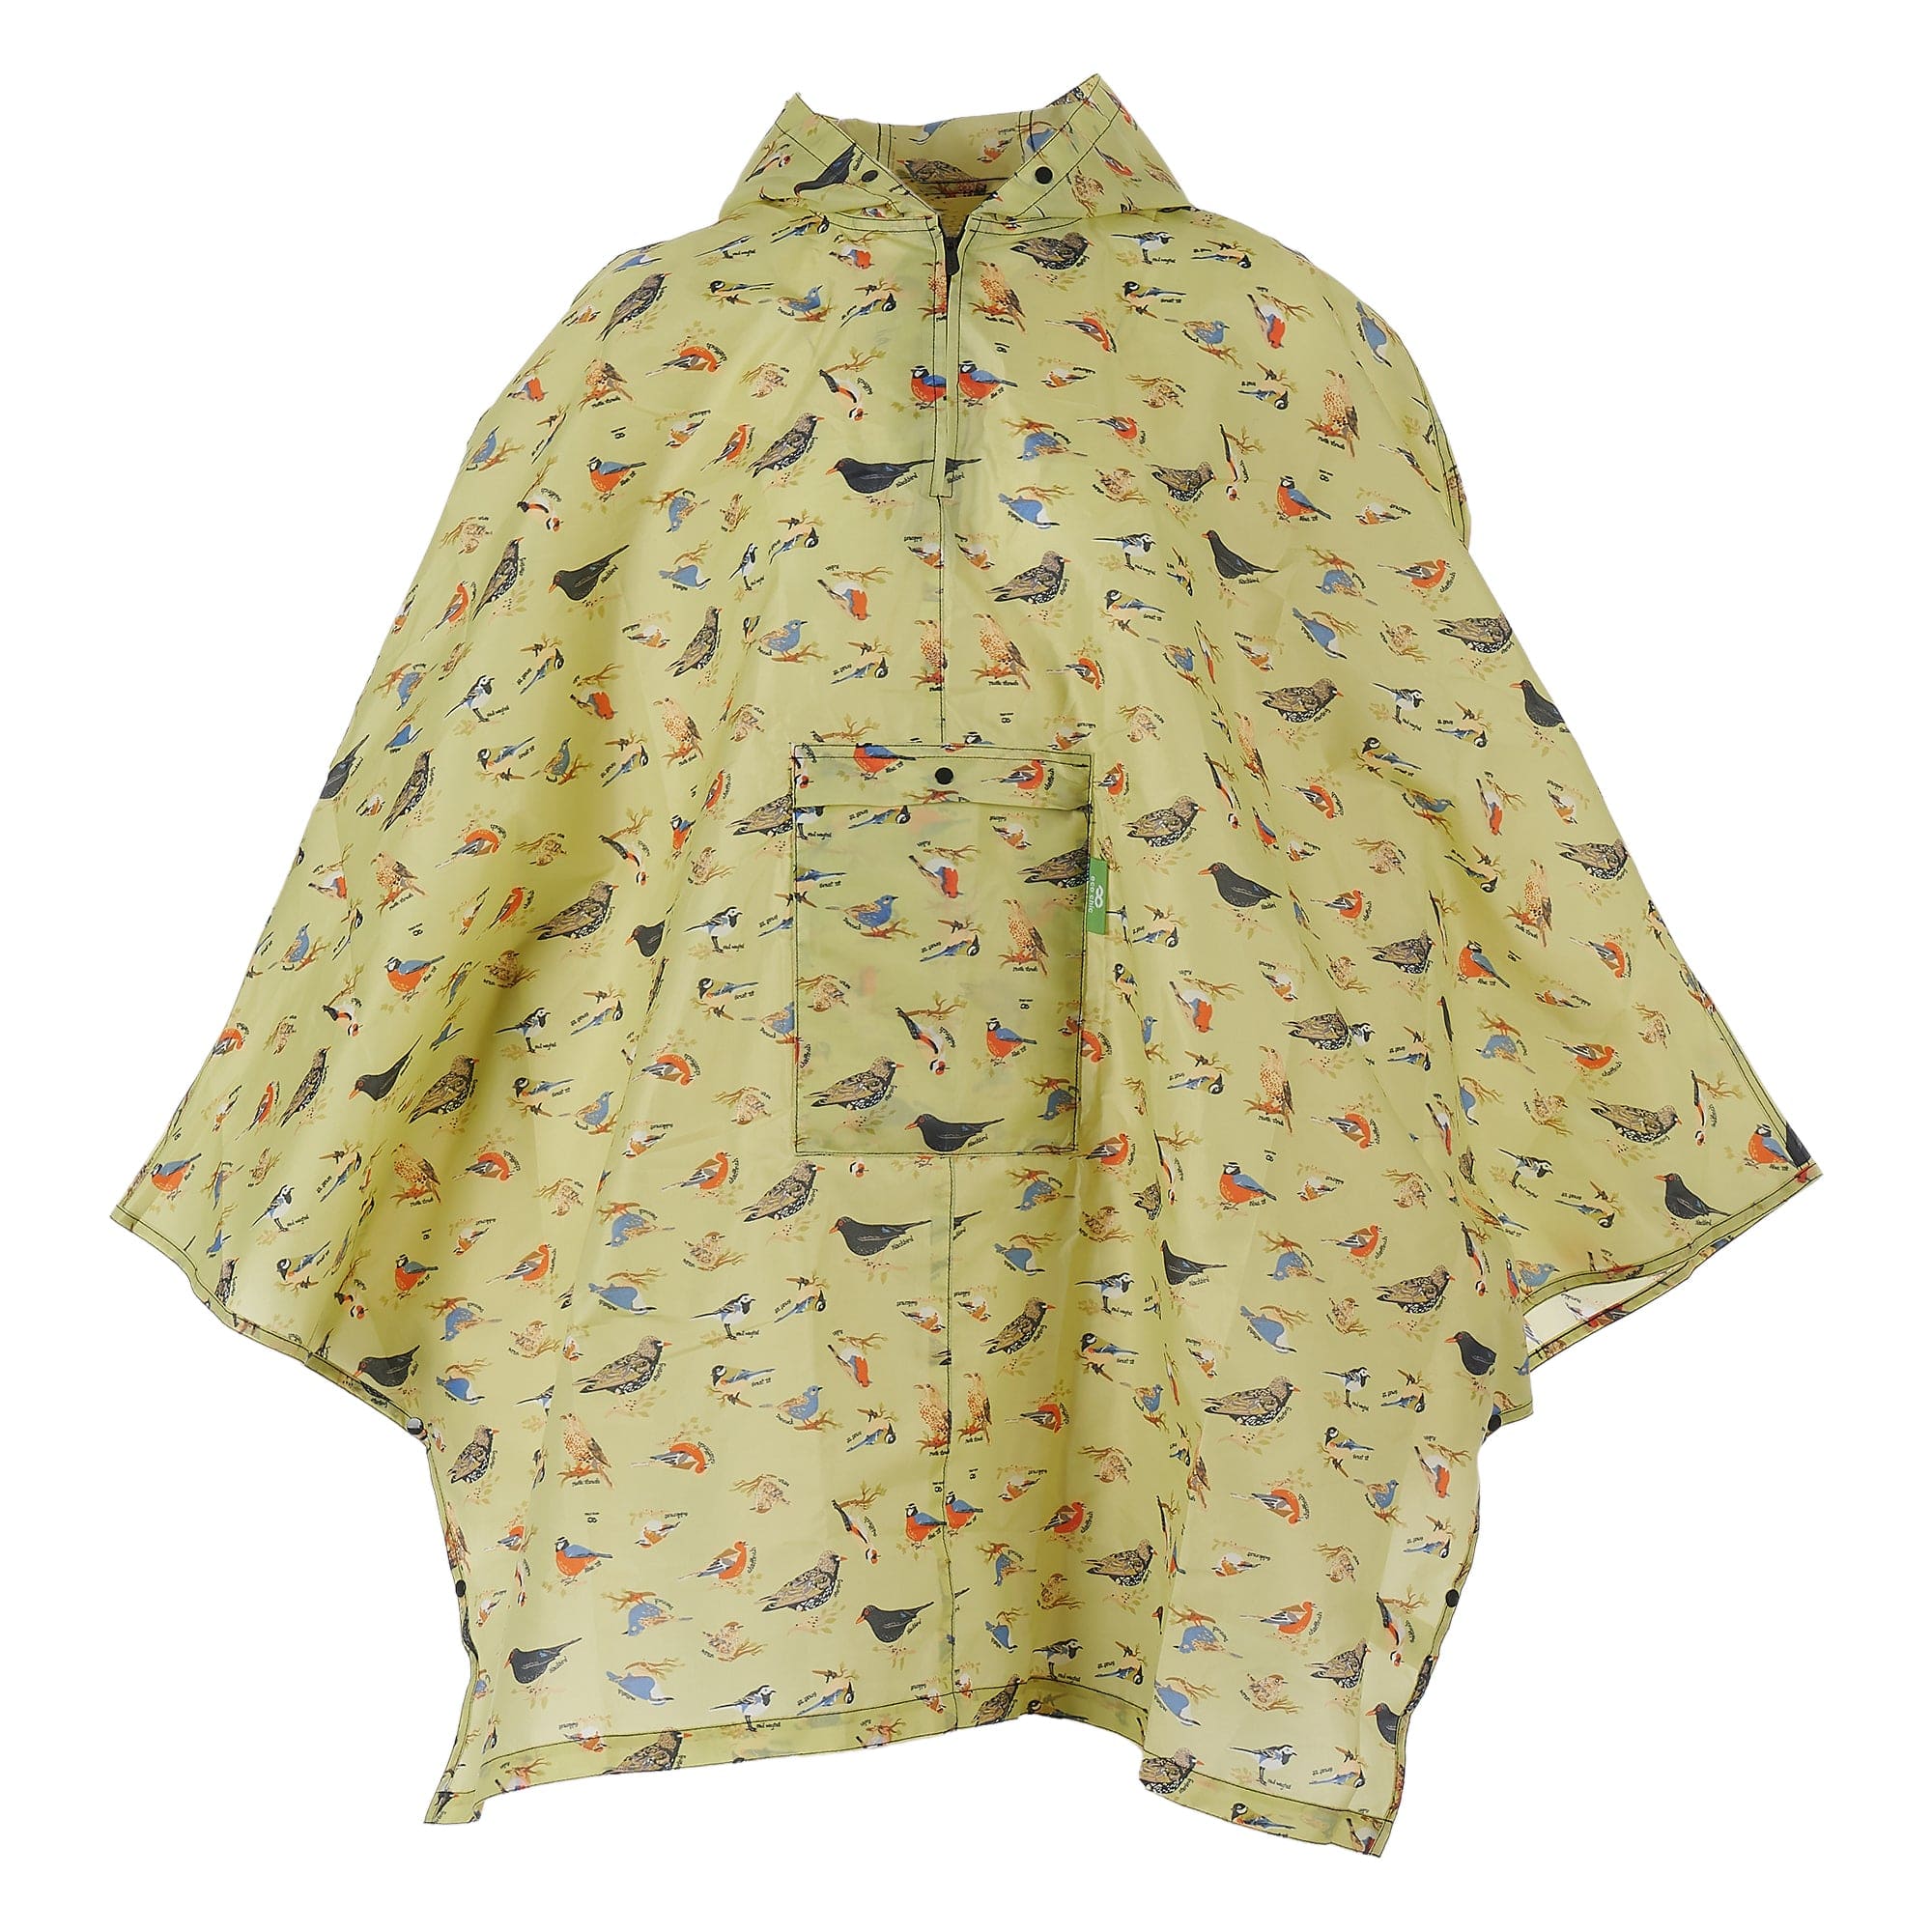 Eco Chic Eco Chic Waterproof Foldable Adult Poncho Wild Birds